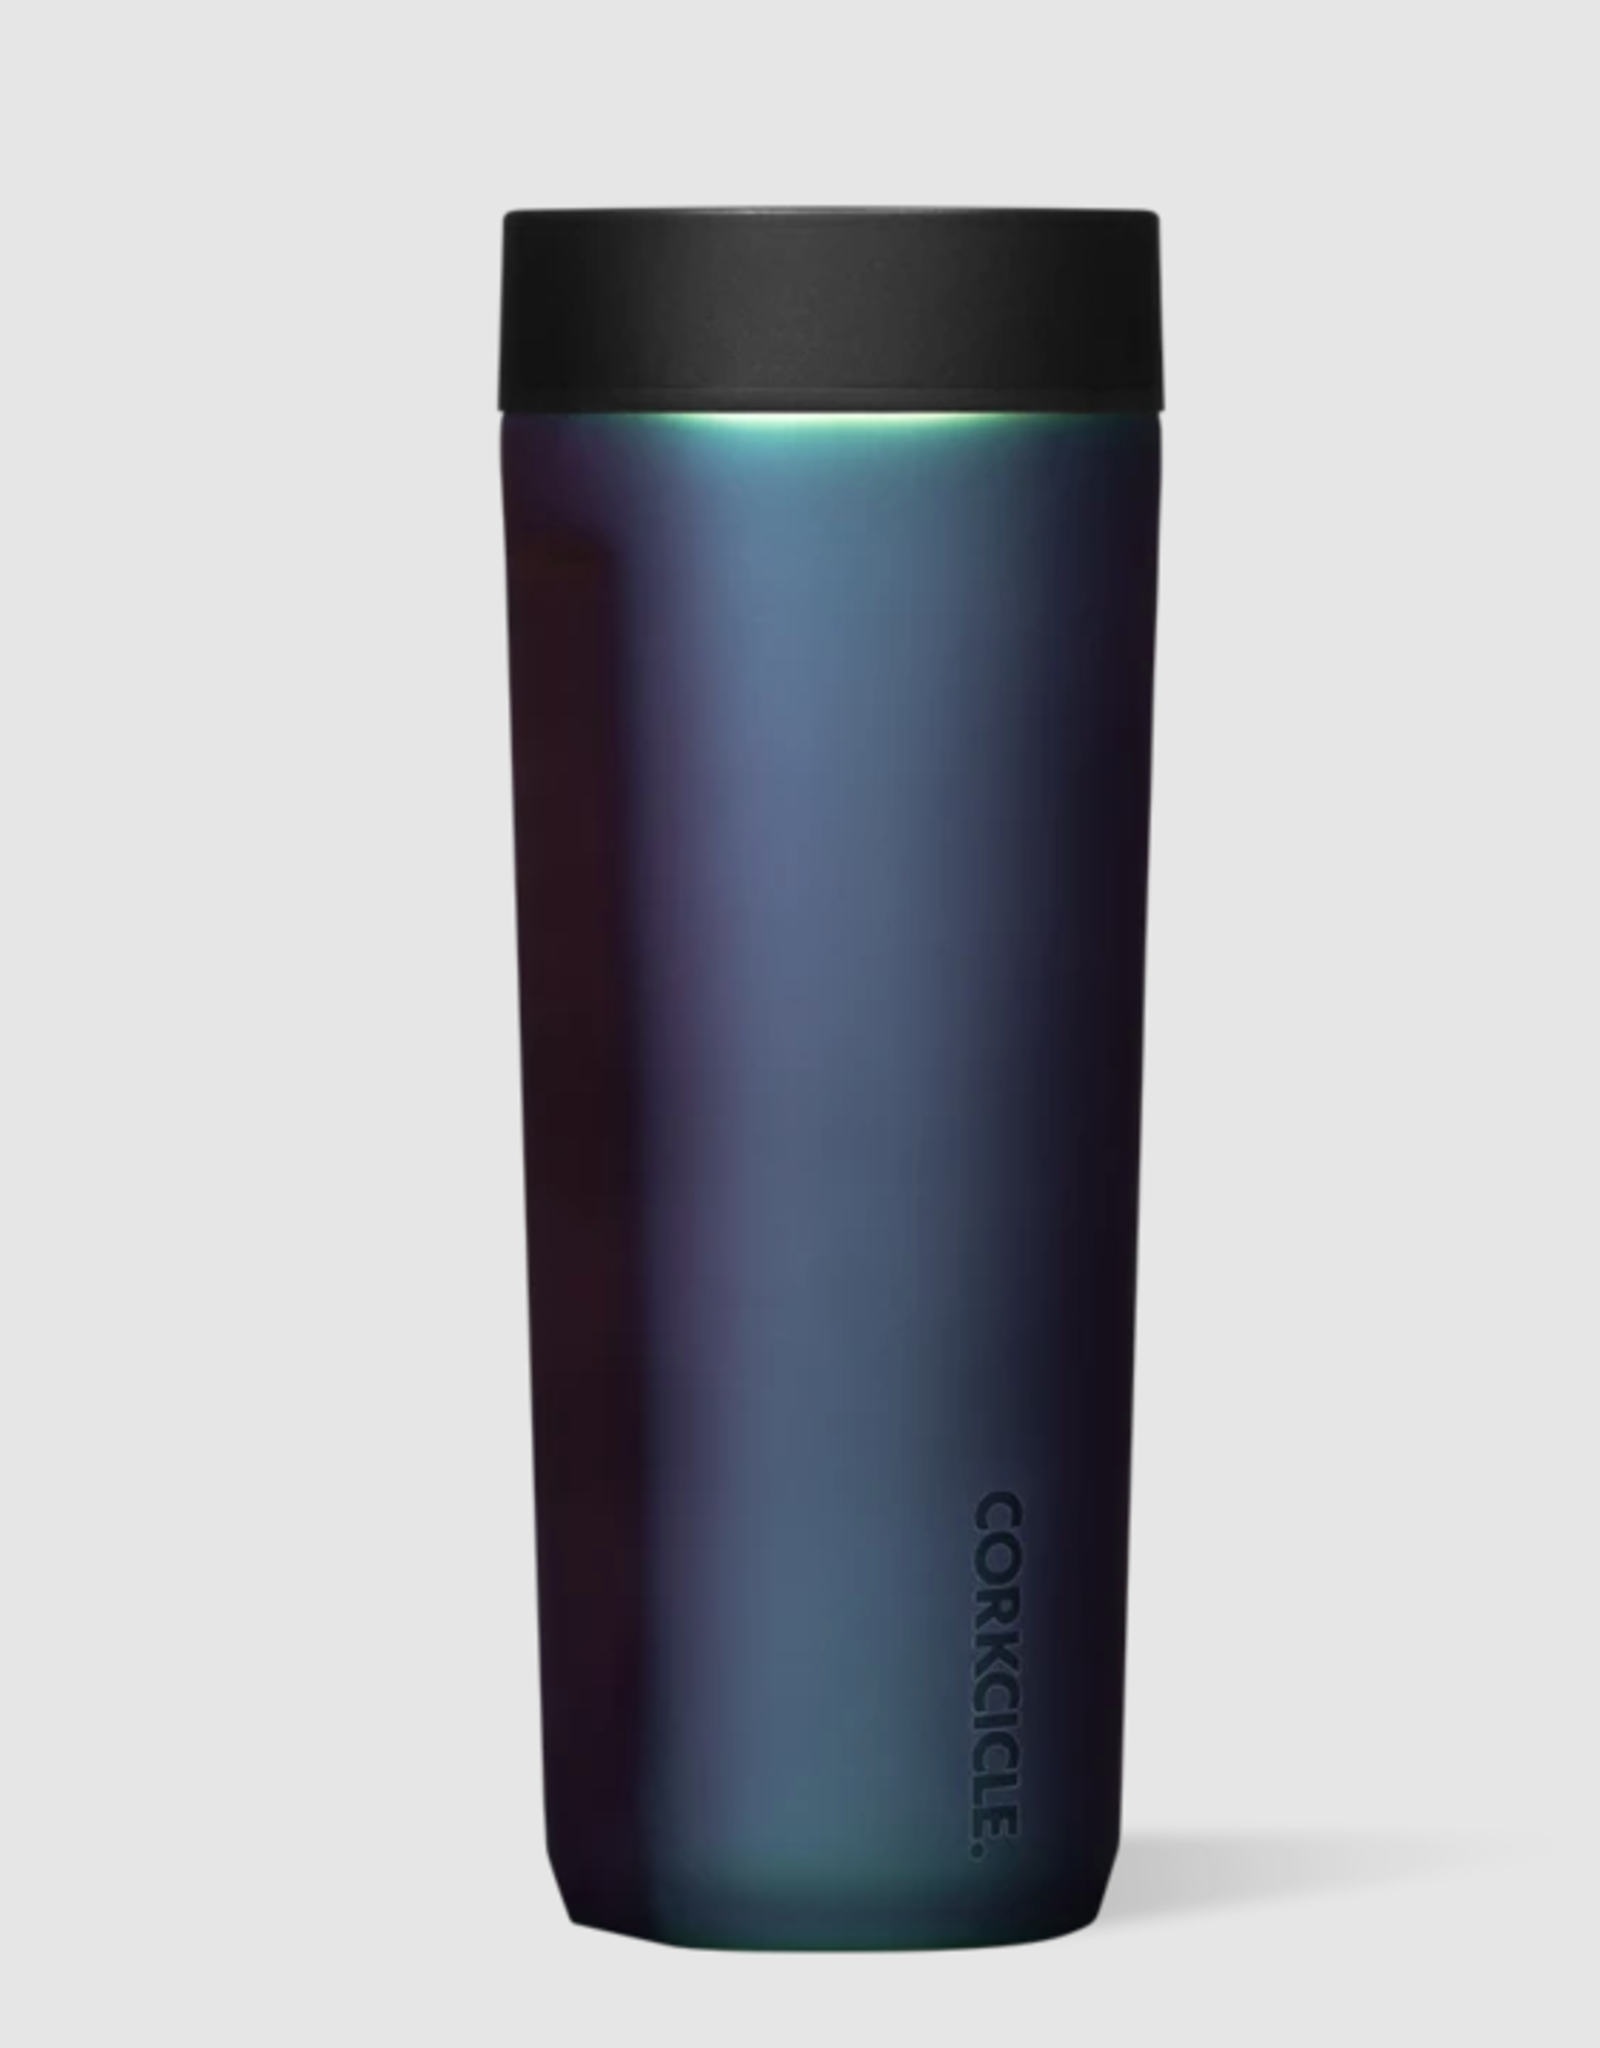 Corkcicle Commuter Cup - 17oz Dragonfly